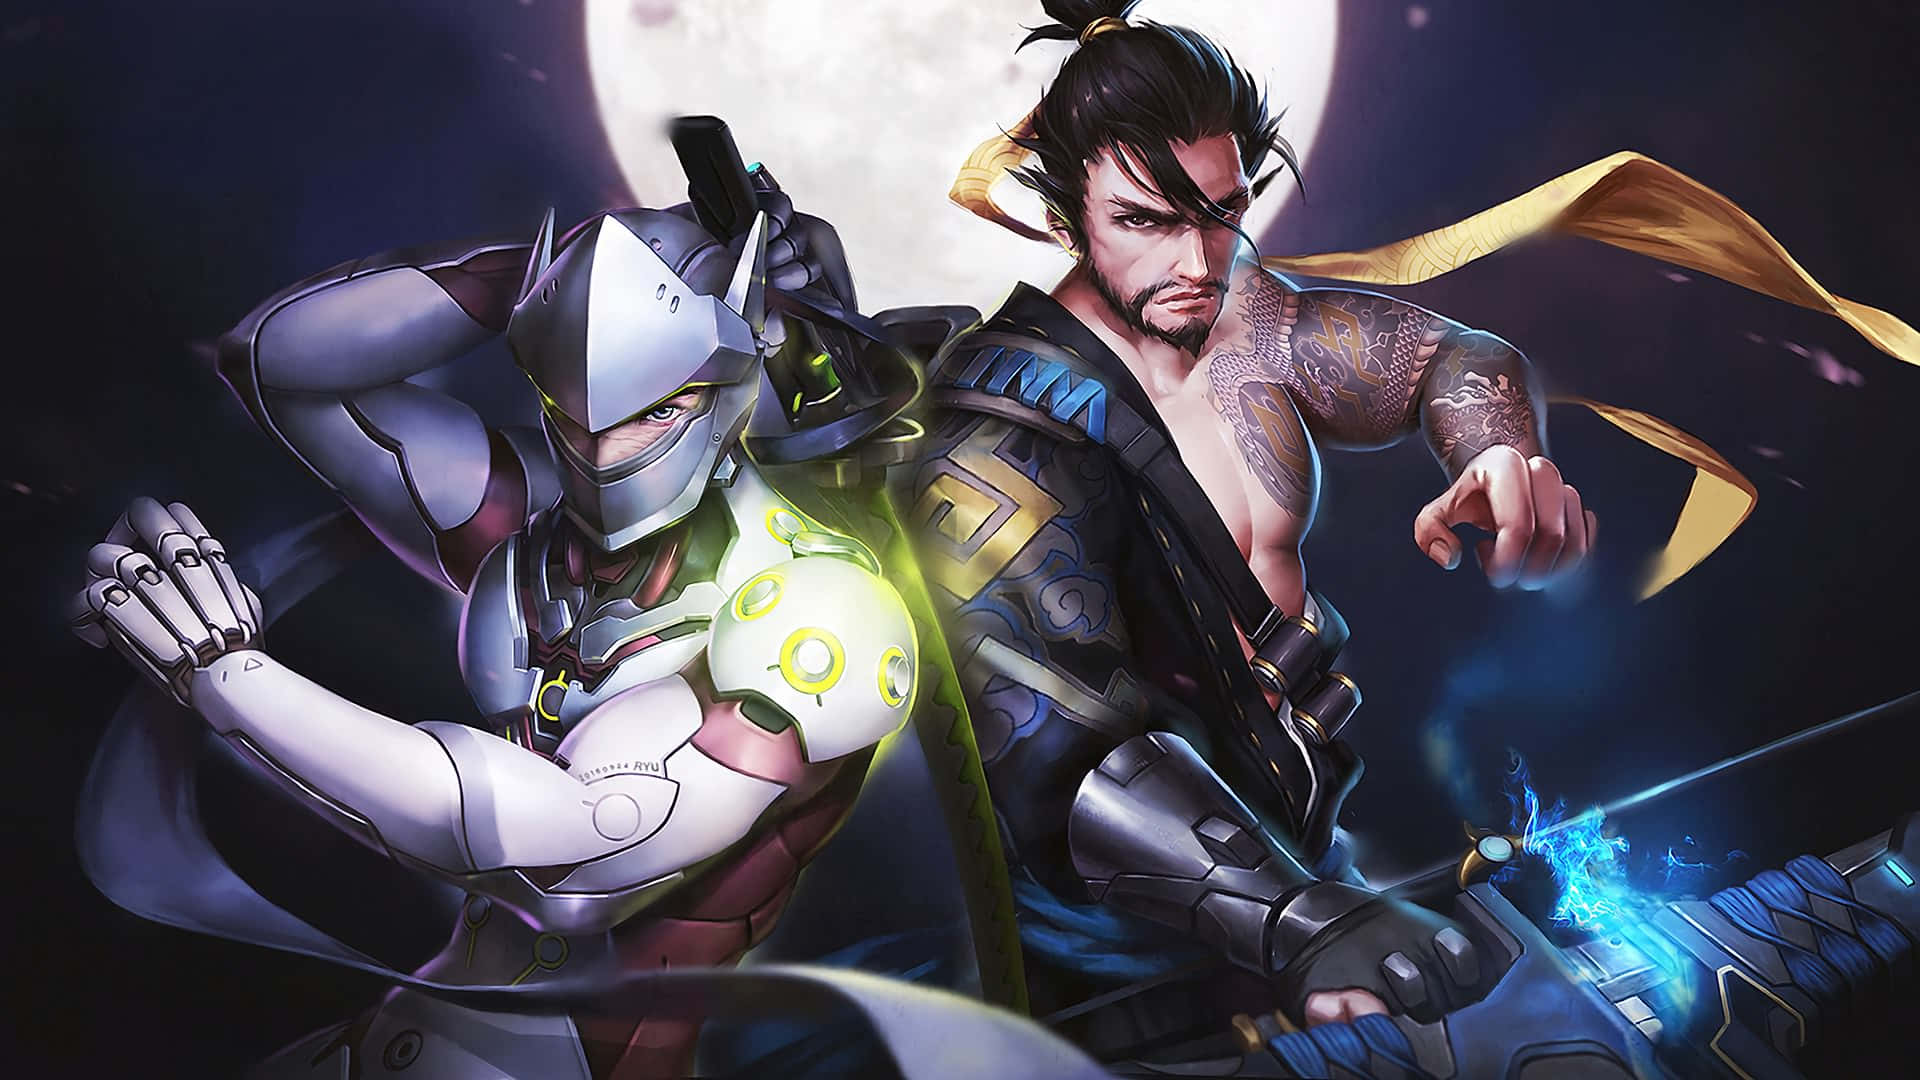 Overwatch Hanzo striking a powerful pose in action Wallpaper